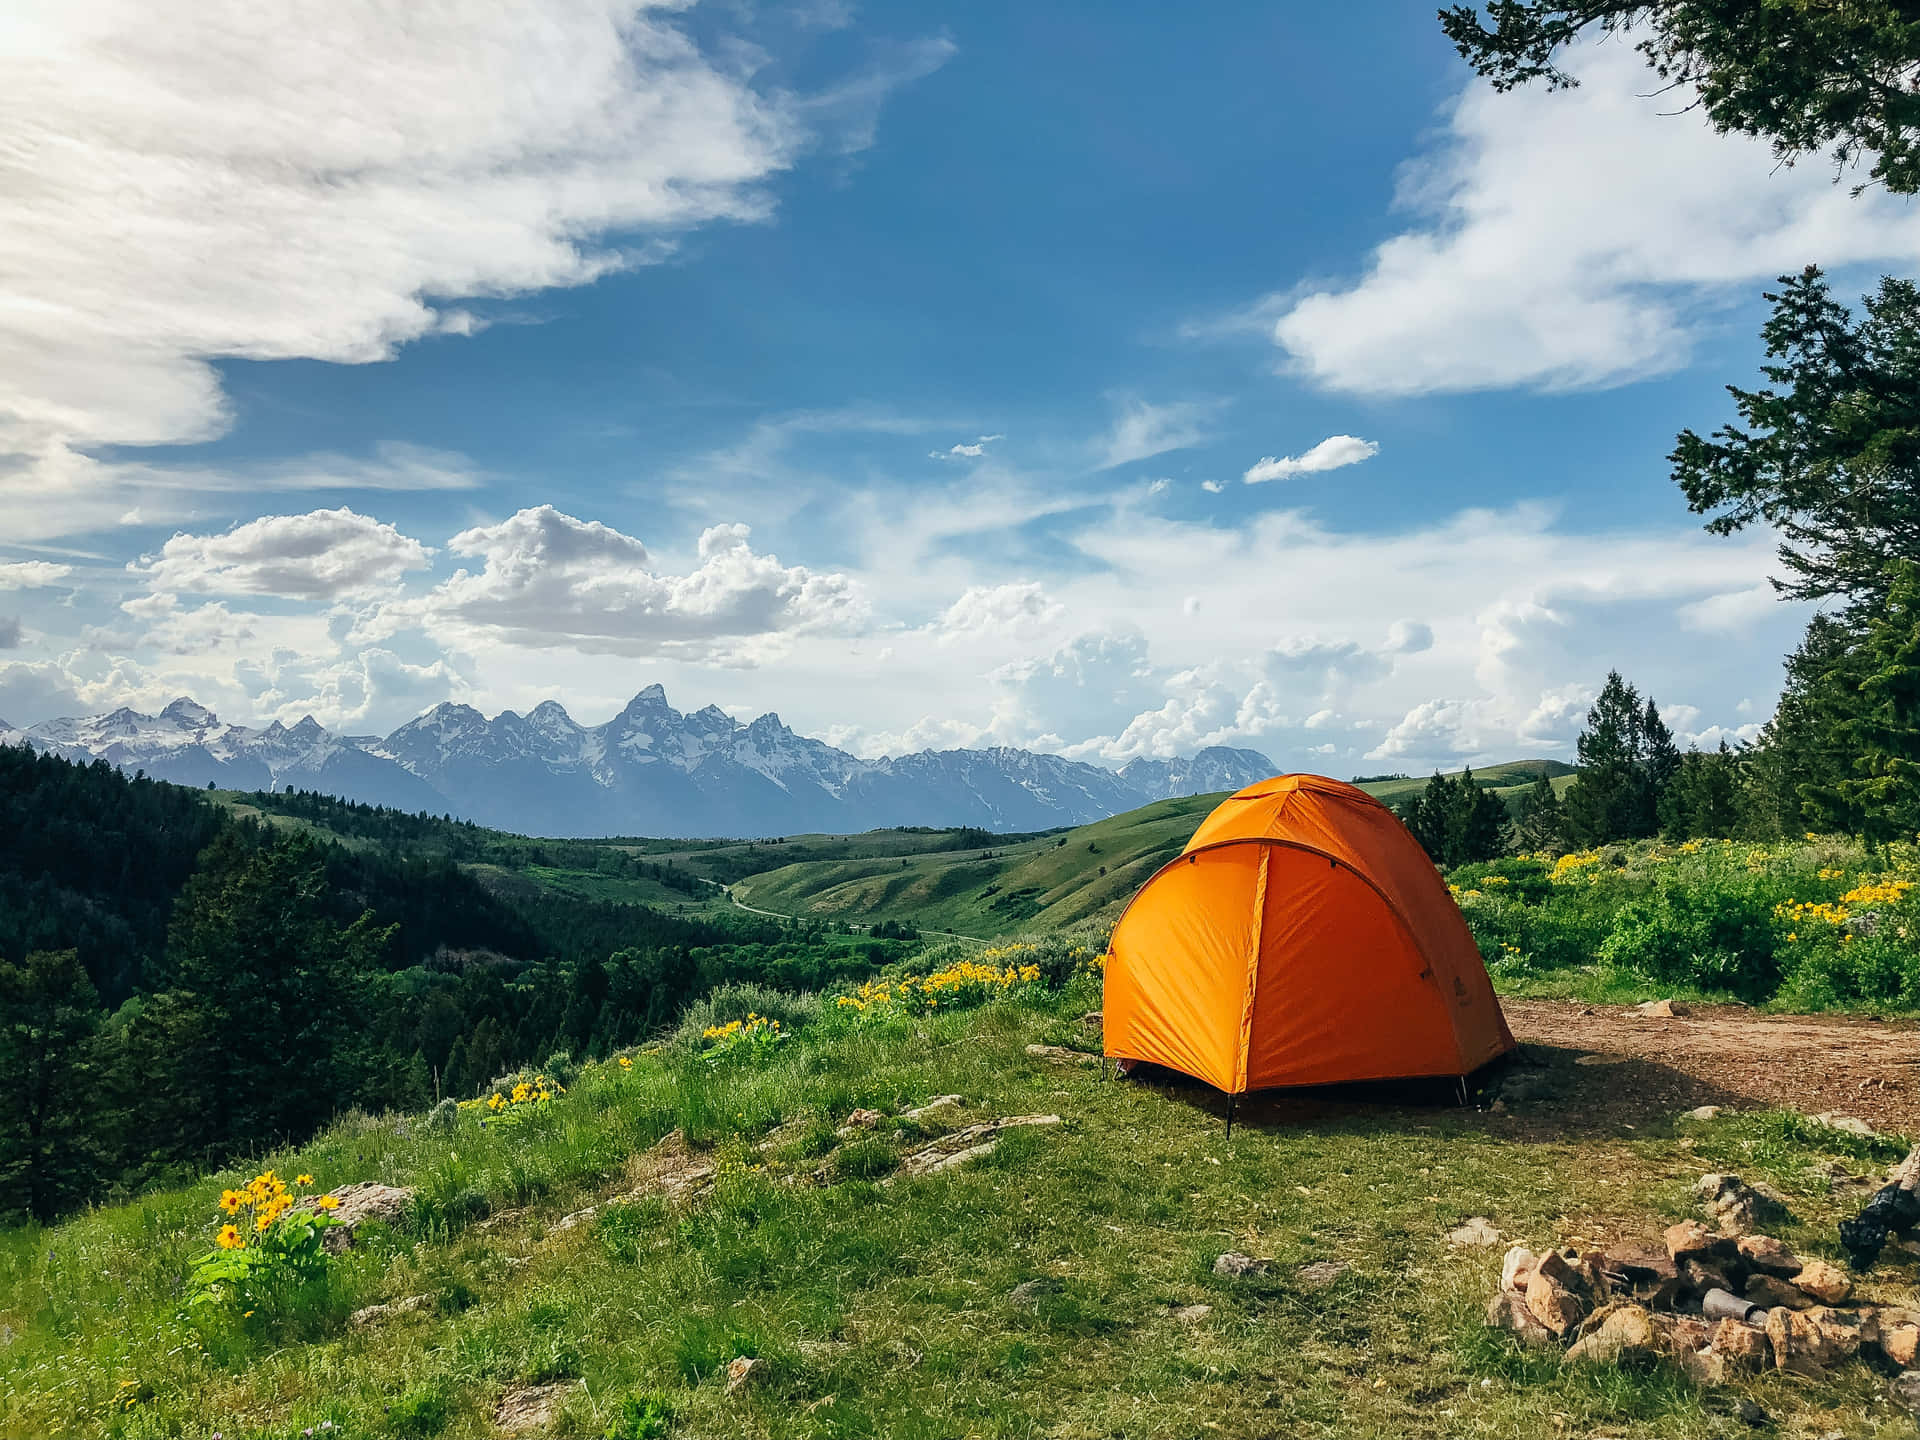 Enjoy the tranquility of camping by escaping to beautiful nature